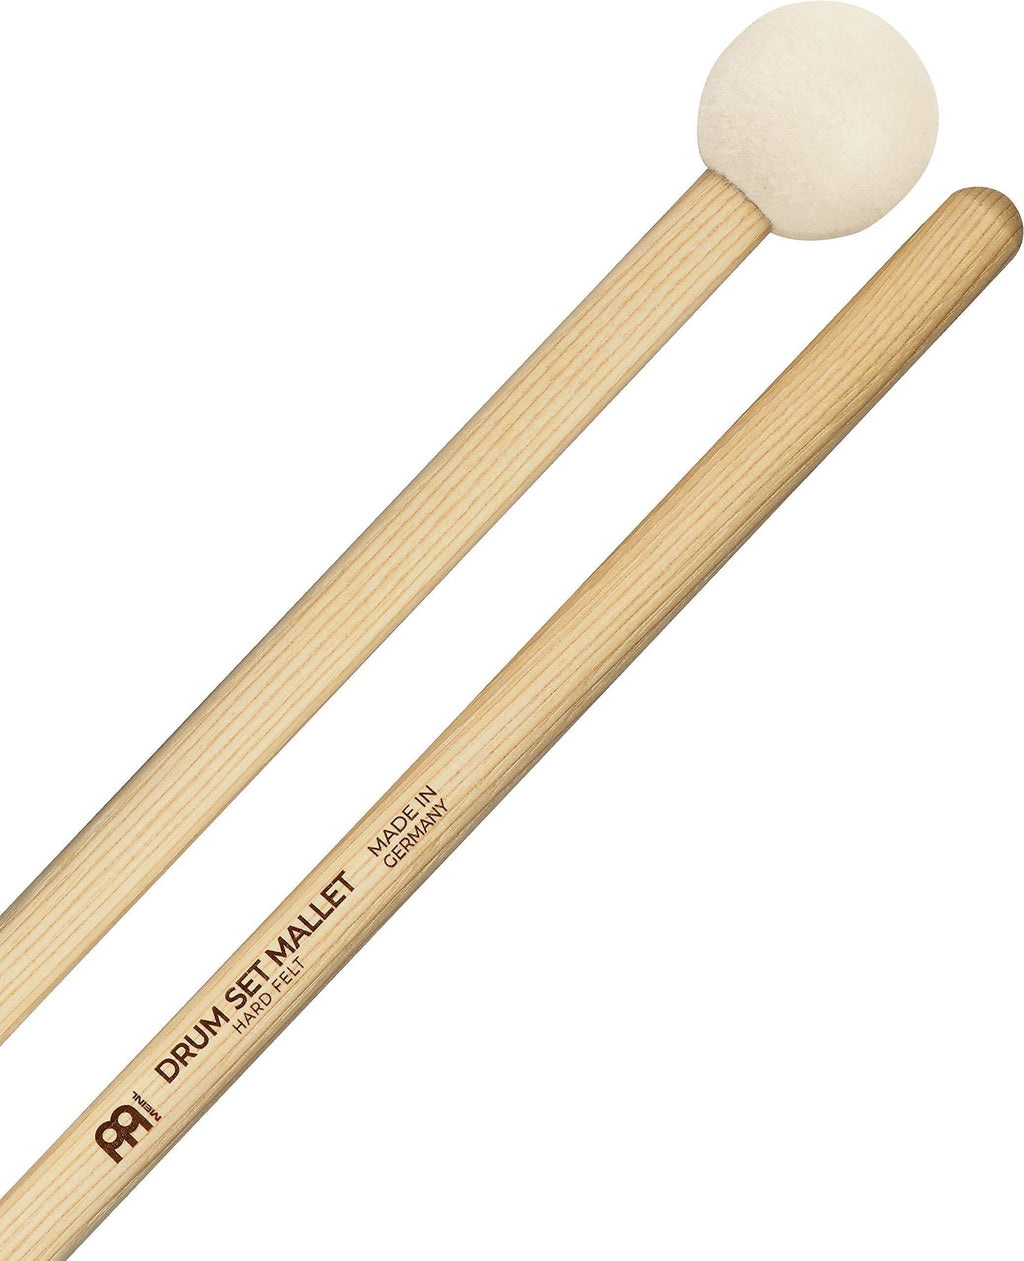 Meinl Drum Set Mallets With Hard Felt Head & 5A American Hickory Handle-Made in GERMANY, (SB402)